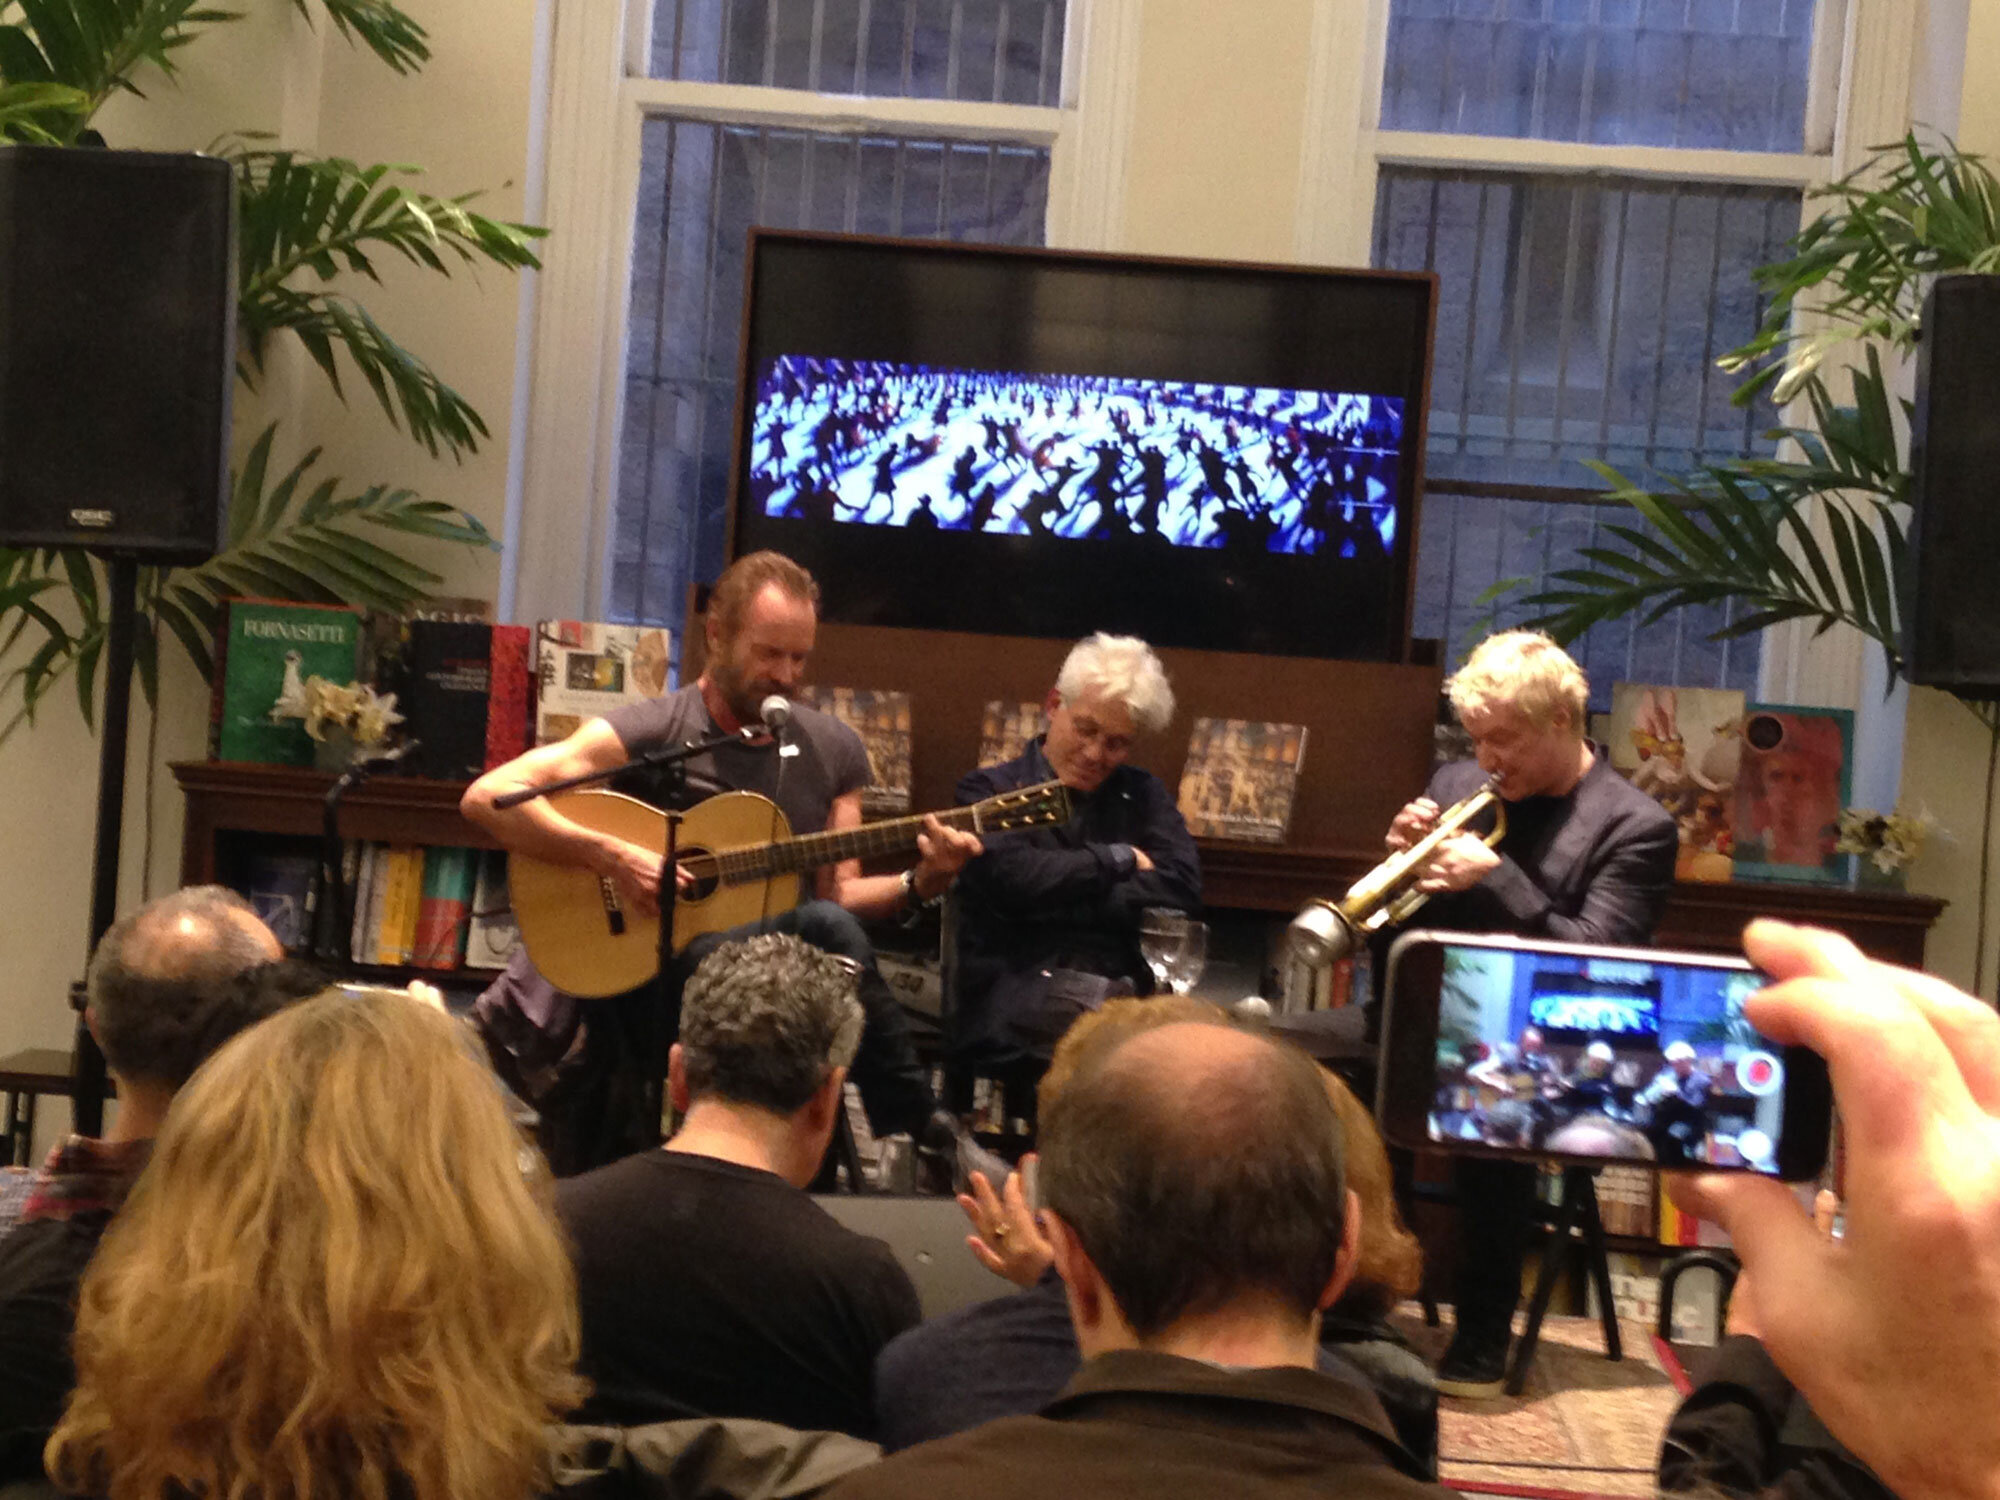  Sting and Chris Boti playing “An Englishman in New York” for Bill Jacklin at a book signing at Rizzoli, New York, 2016 